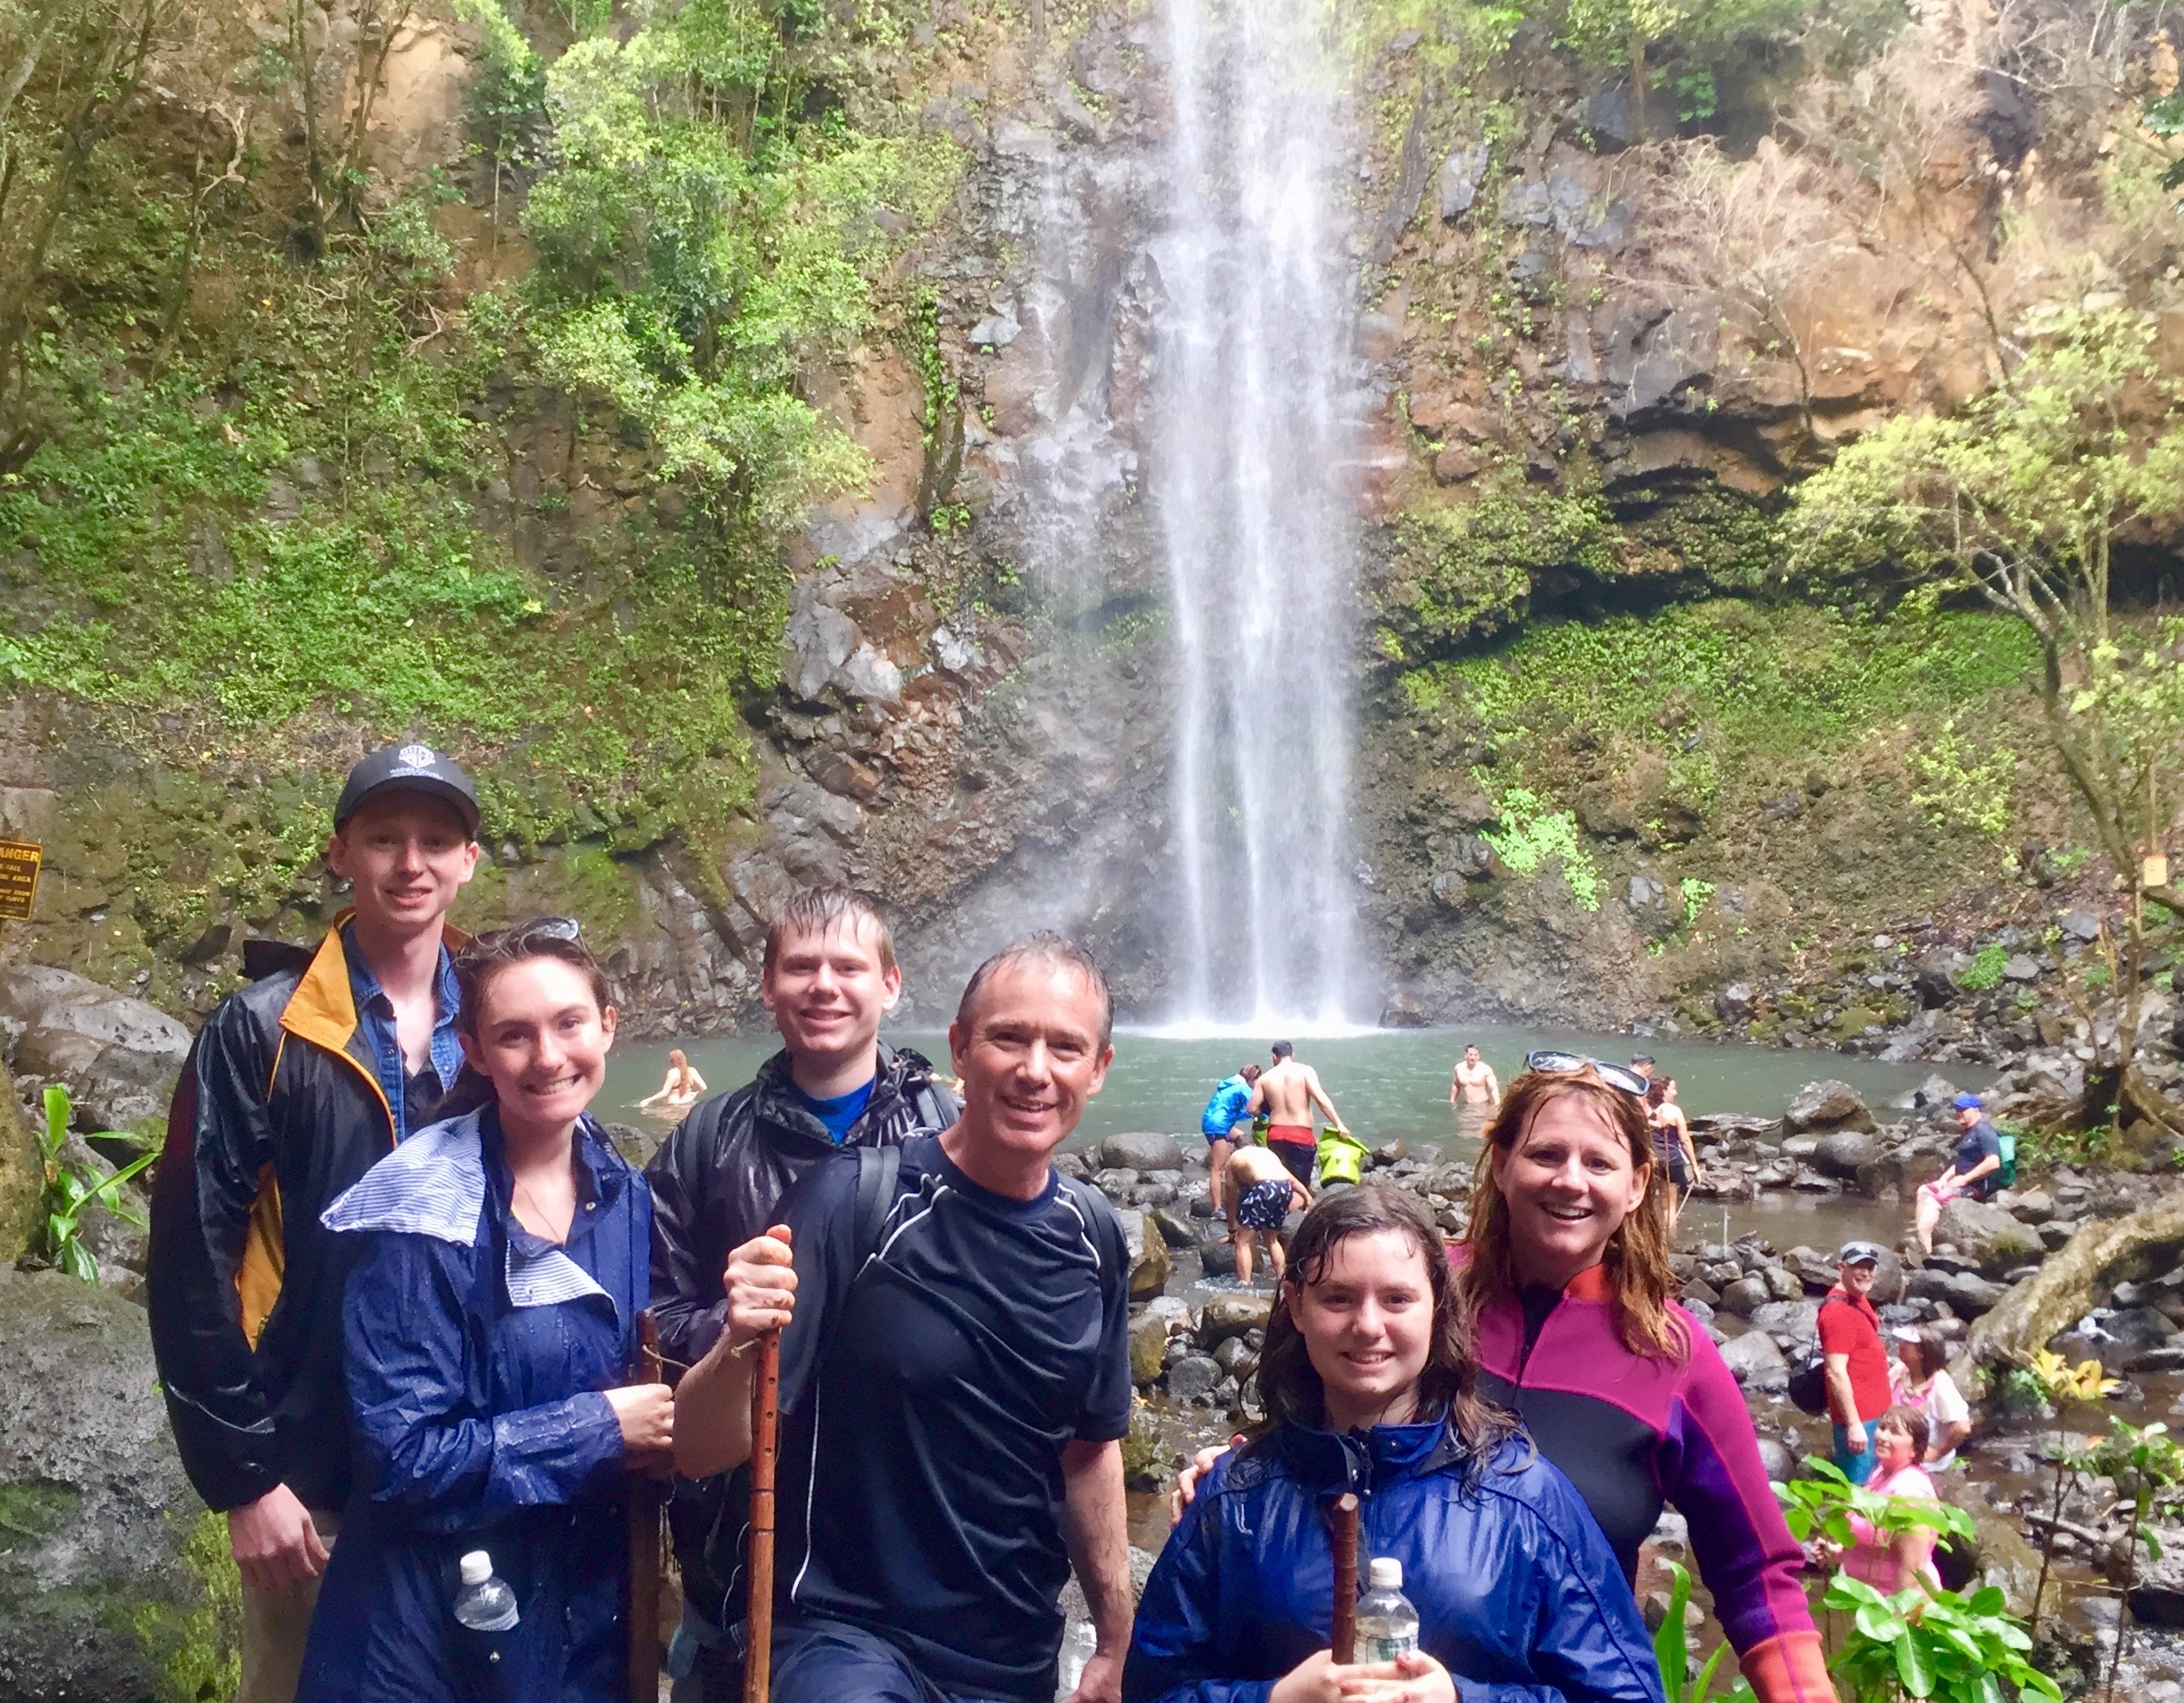 Kayaking in the pouring rain – an absolutely epic adventure!